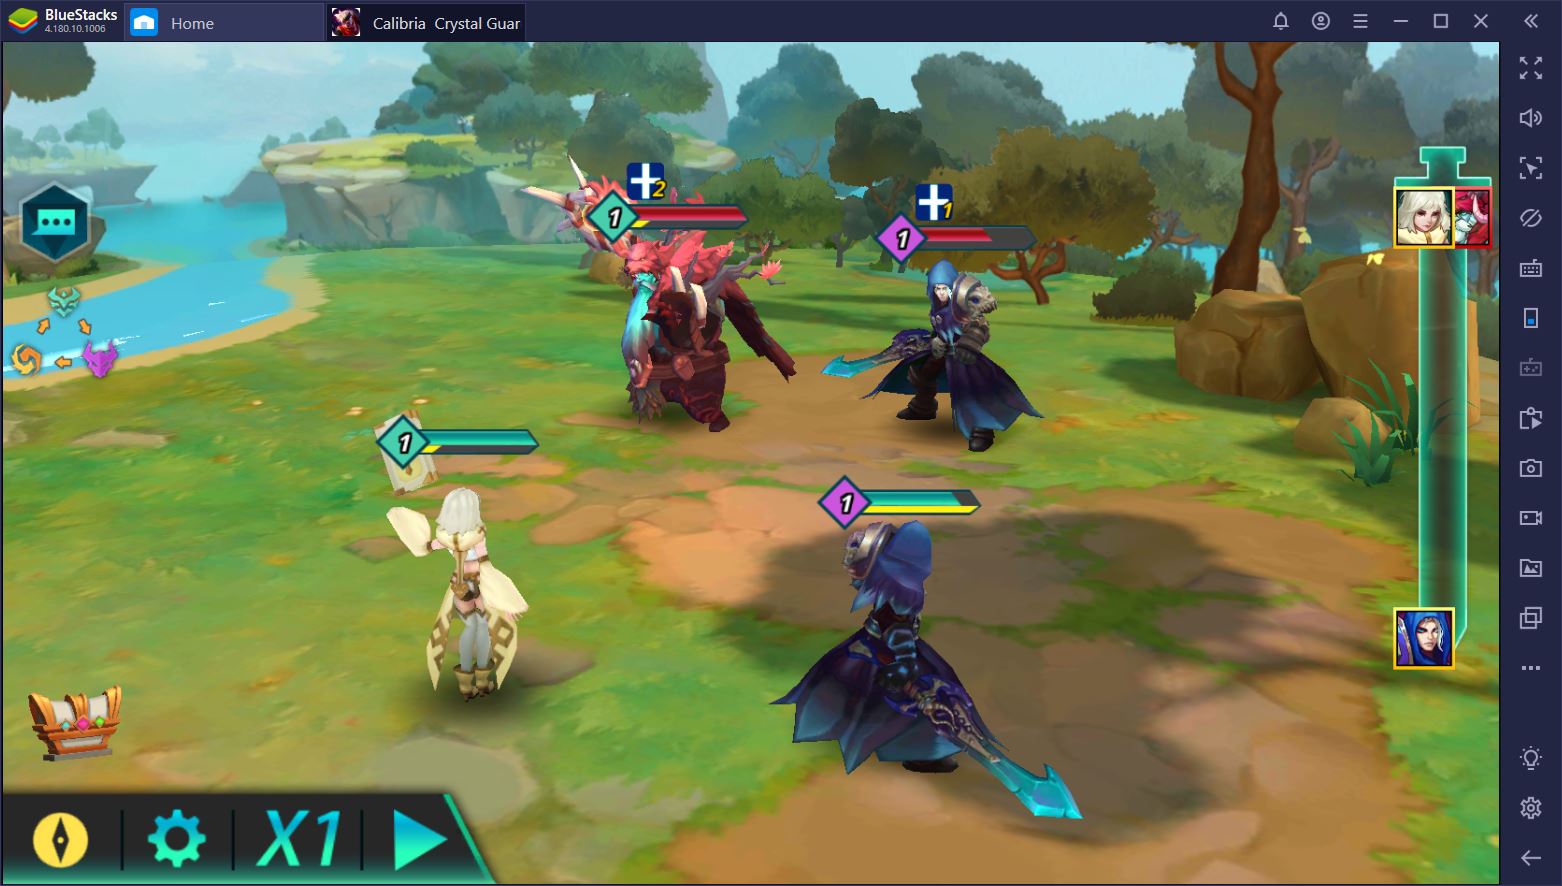 How to Play Calibria: Crystal Guardians on PC with BlueStacks